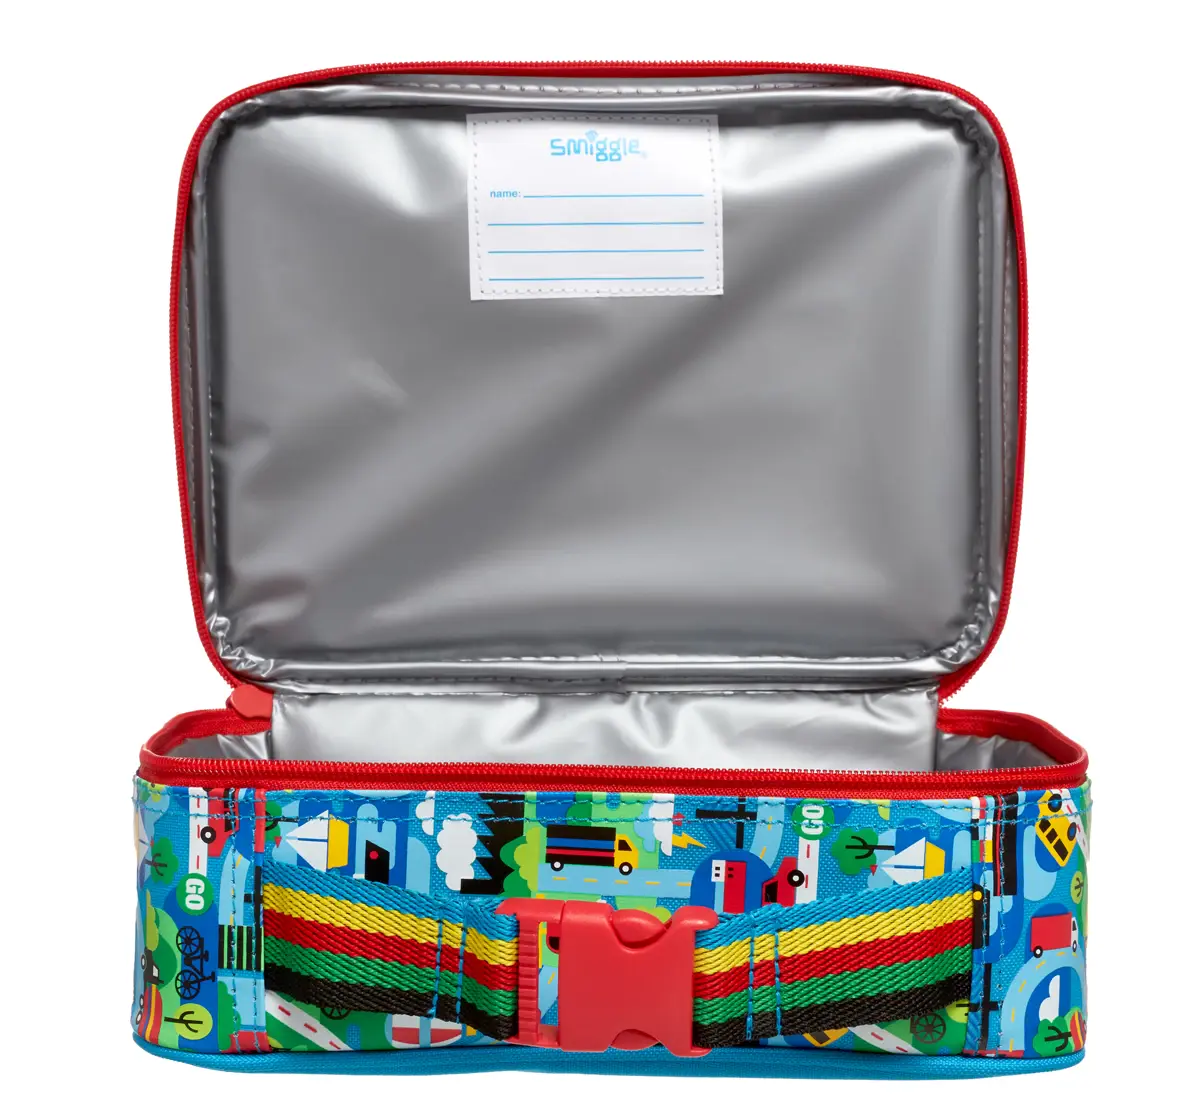 Smiggle Round About Teeny Tiny Square Lunch Box, Blue, 3Y+